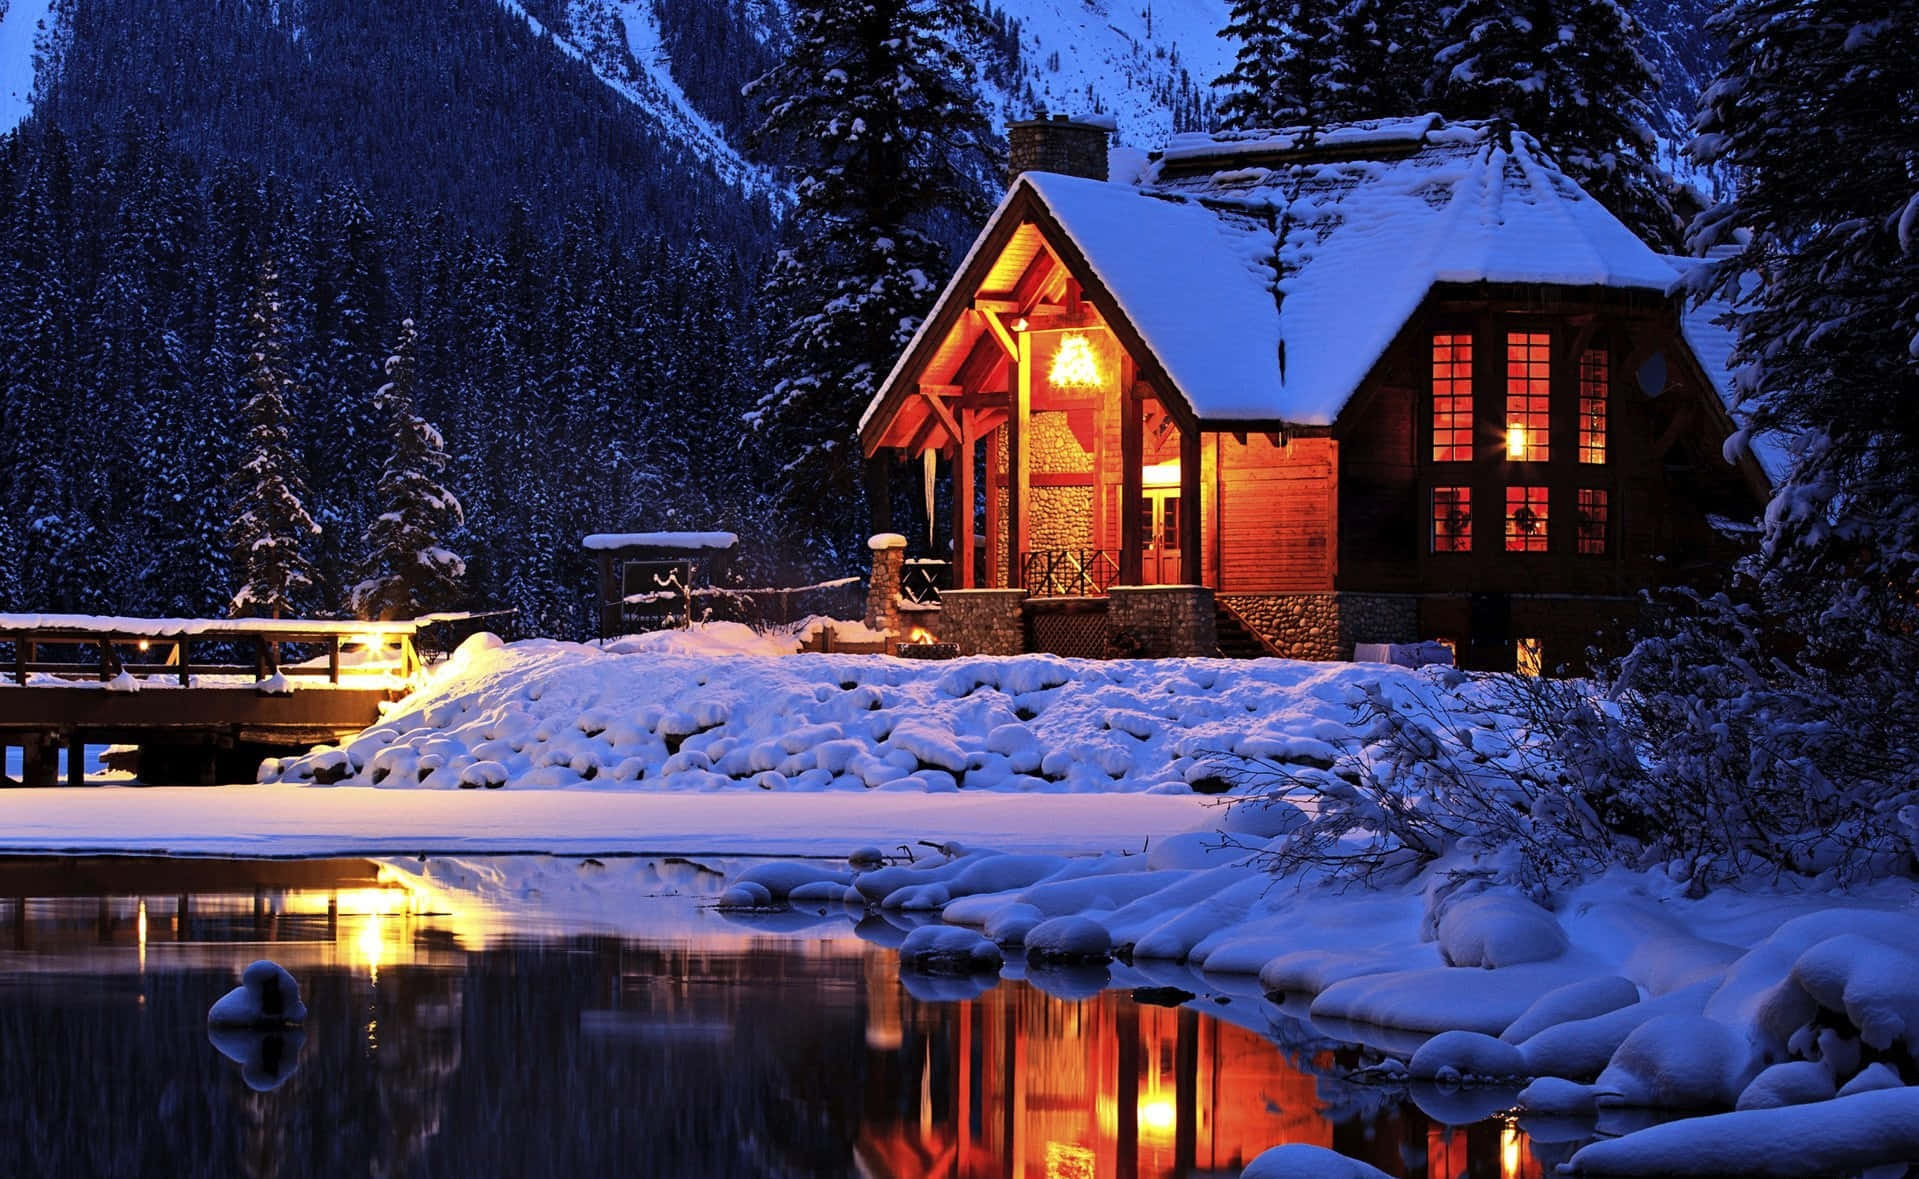 Cabin Covered In Snow At Night Wallpaper